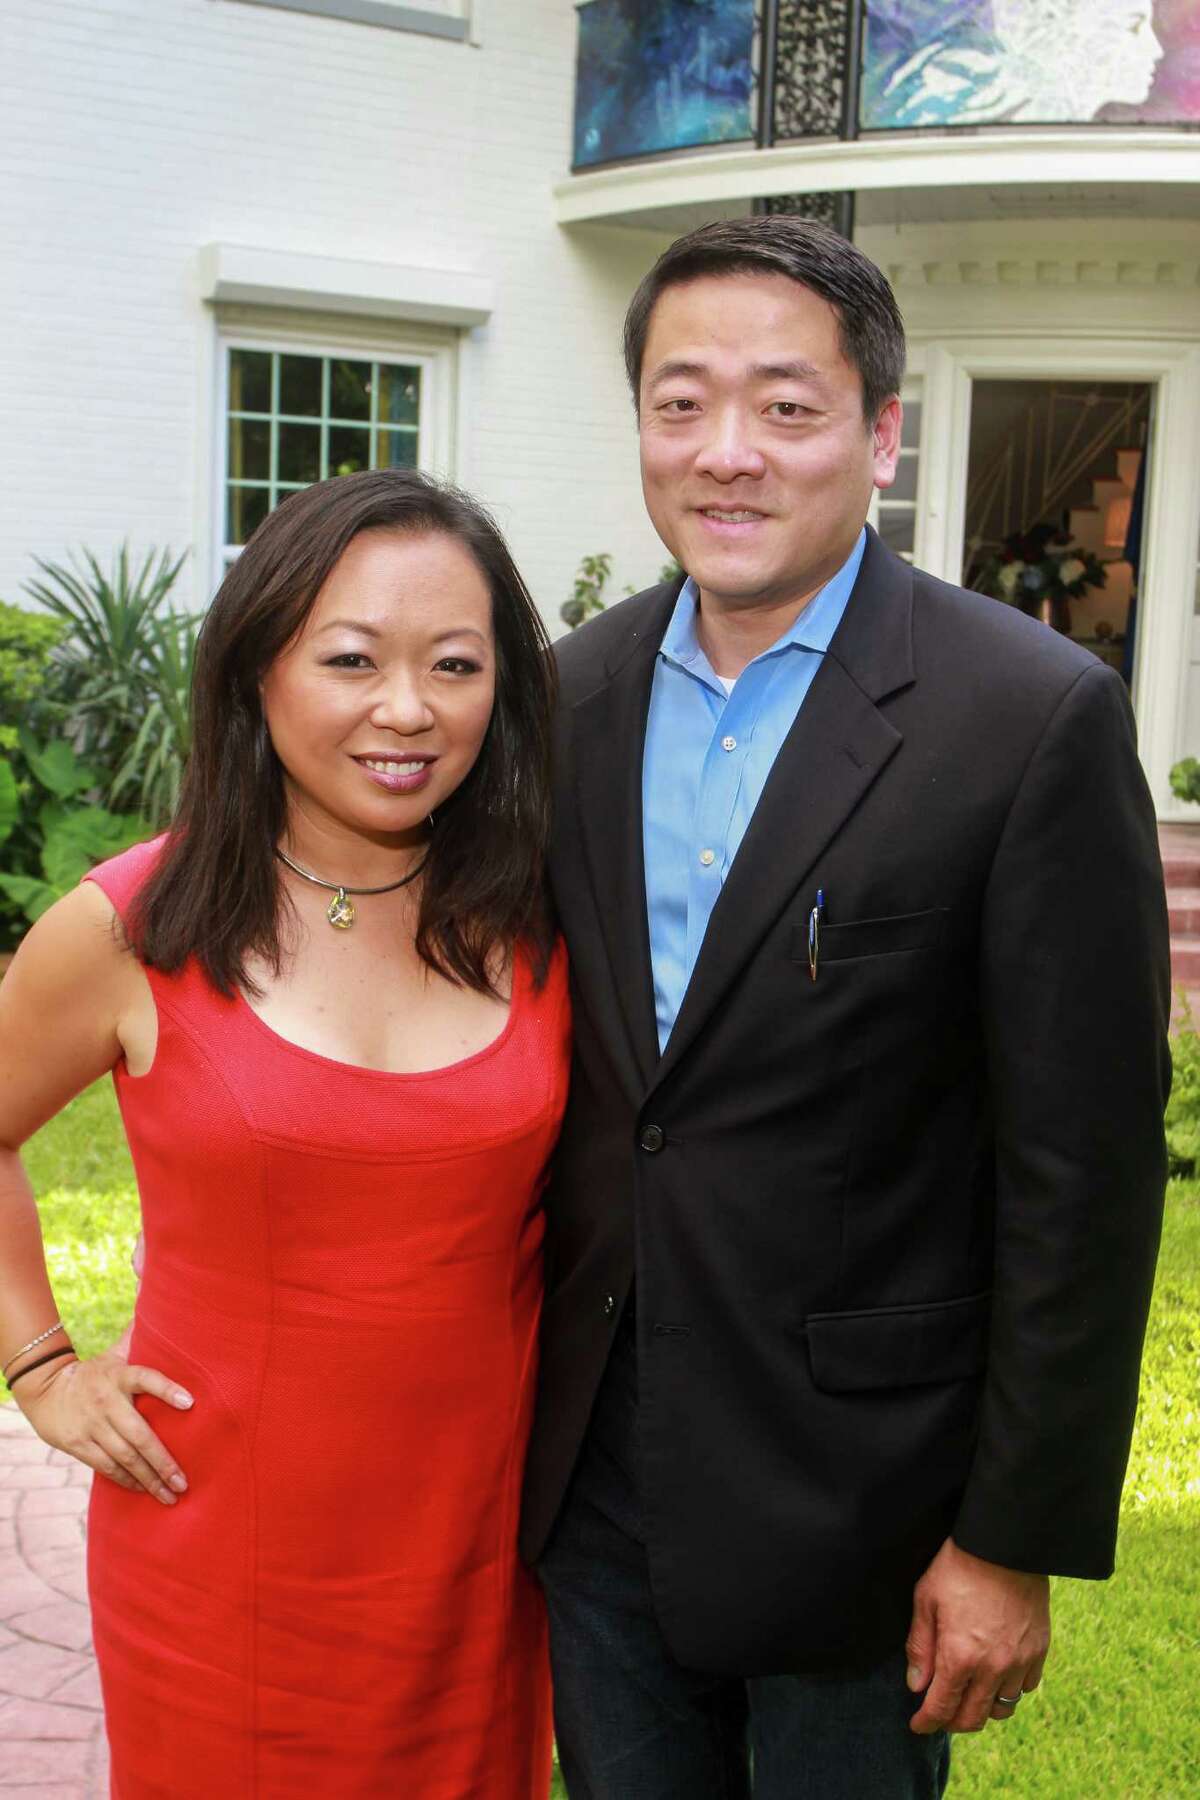 Miya Shay and Gene Wu at the Bastille Day cocktail reception celebrating the French Republic’s National Day.